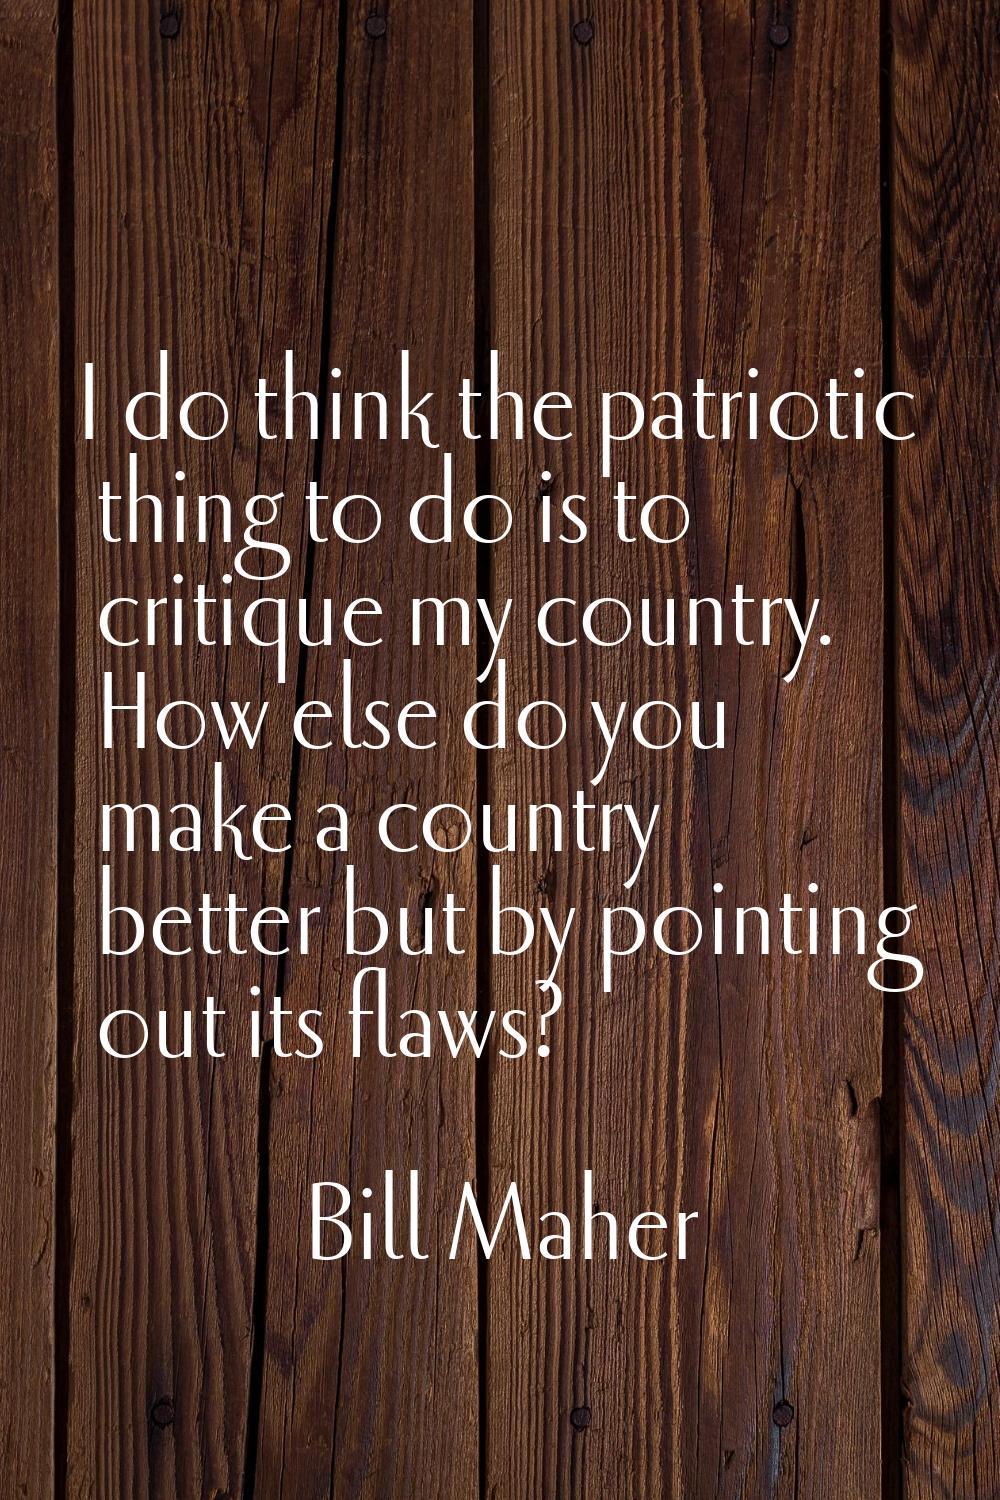 I do think the patriotic thing to do is to critique my country. How else do you make a country bett